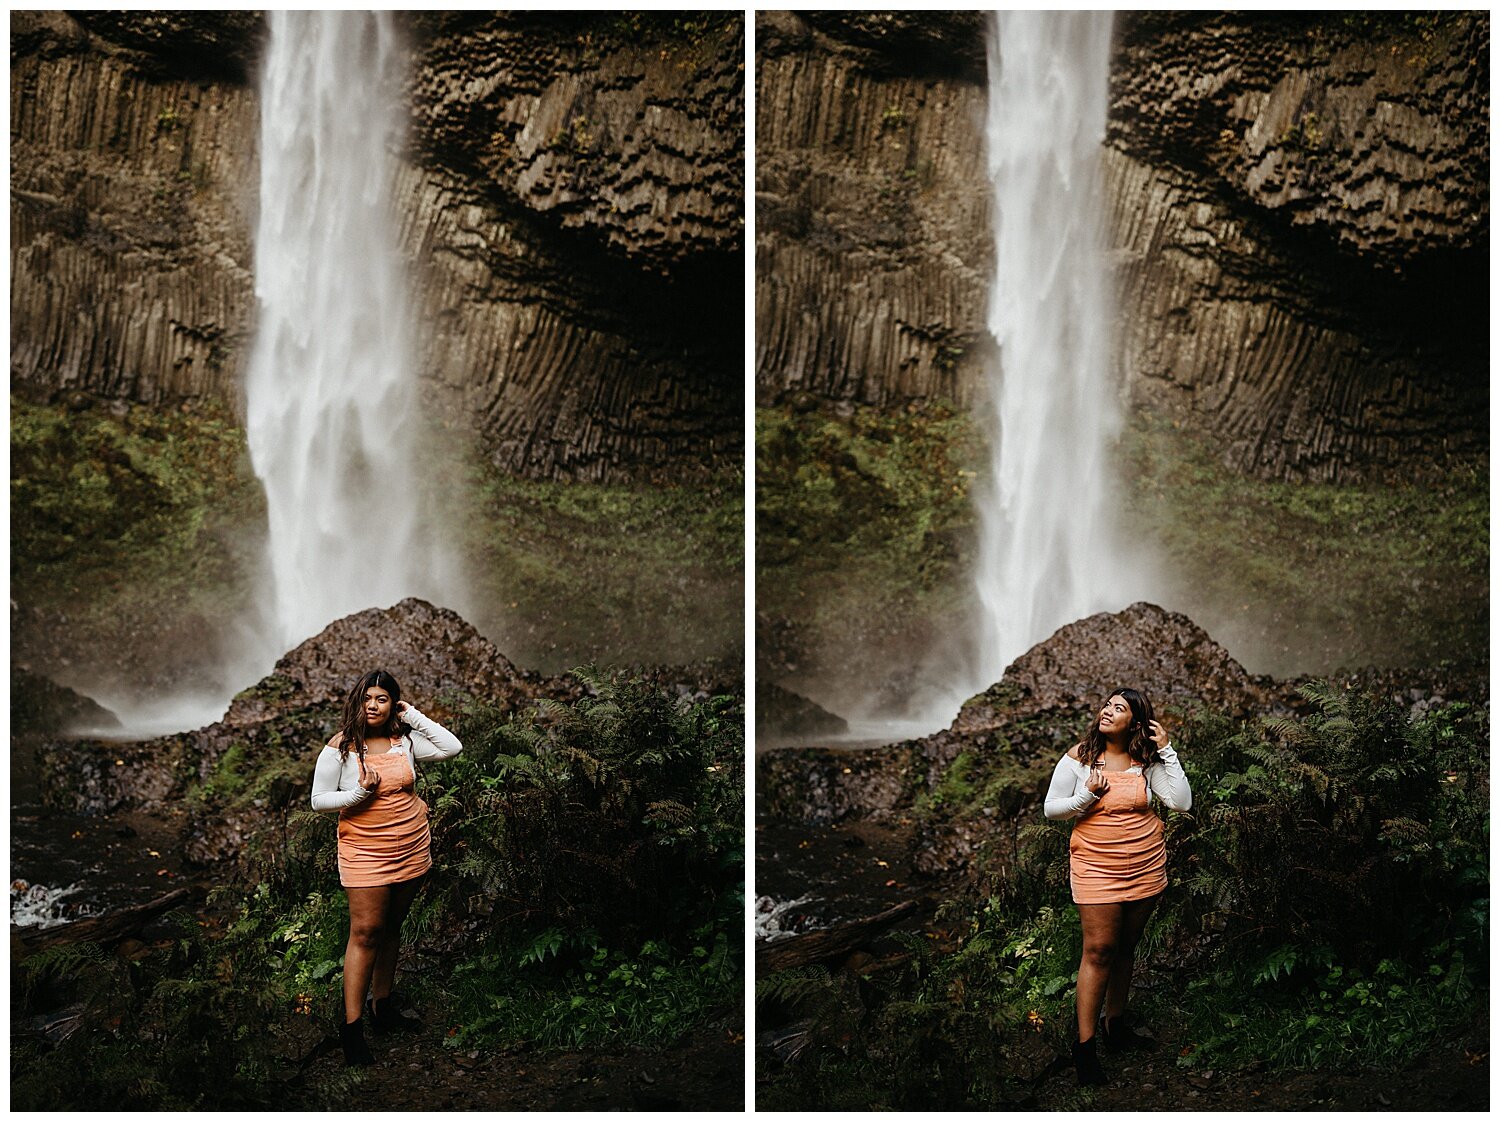  Girl wearing orange overalls in front of waterfall for her senior photos. 